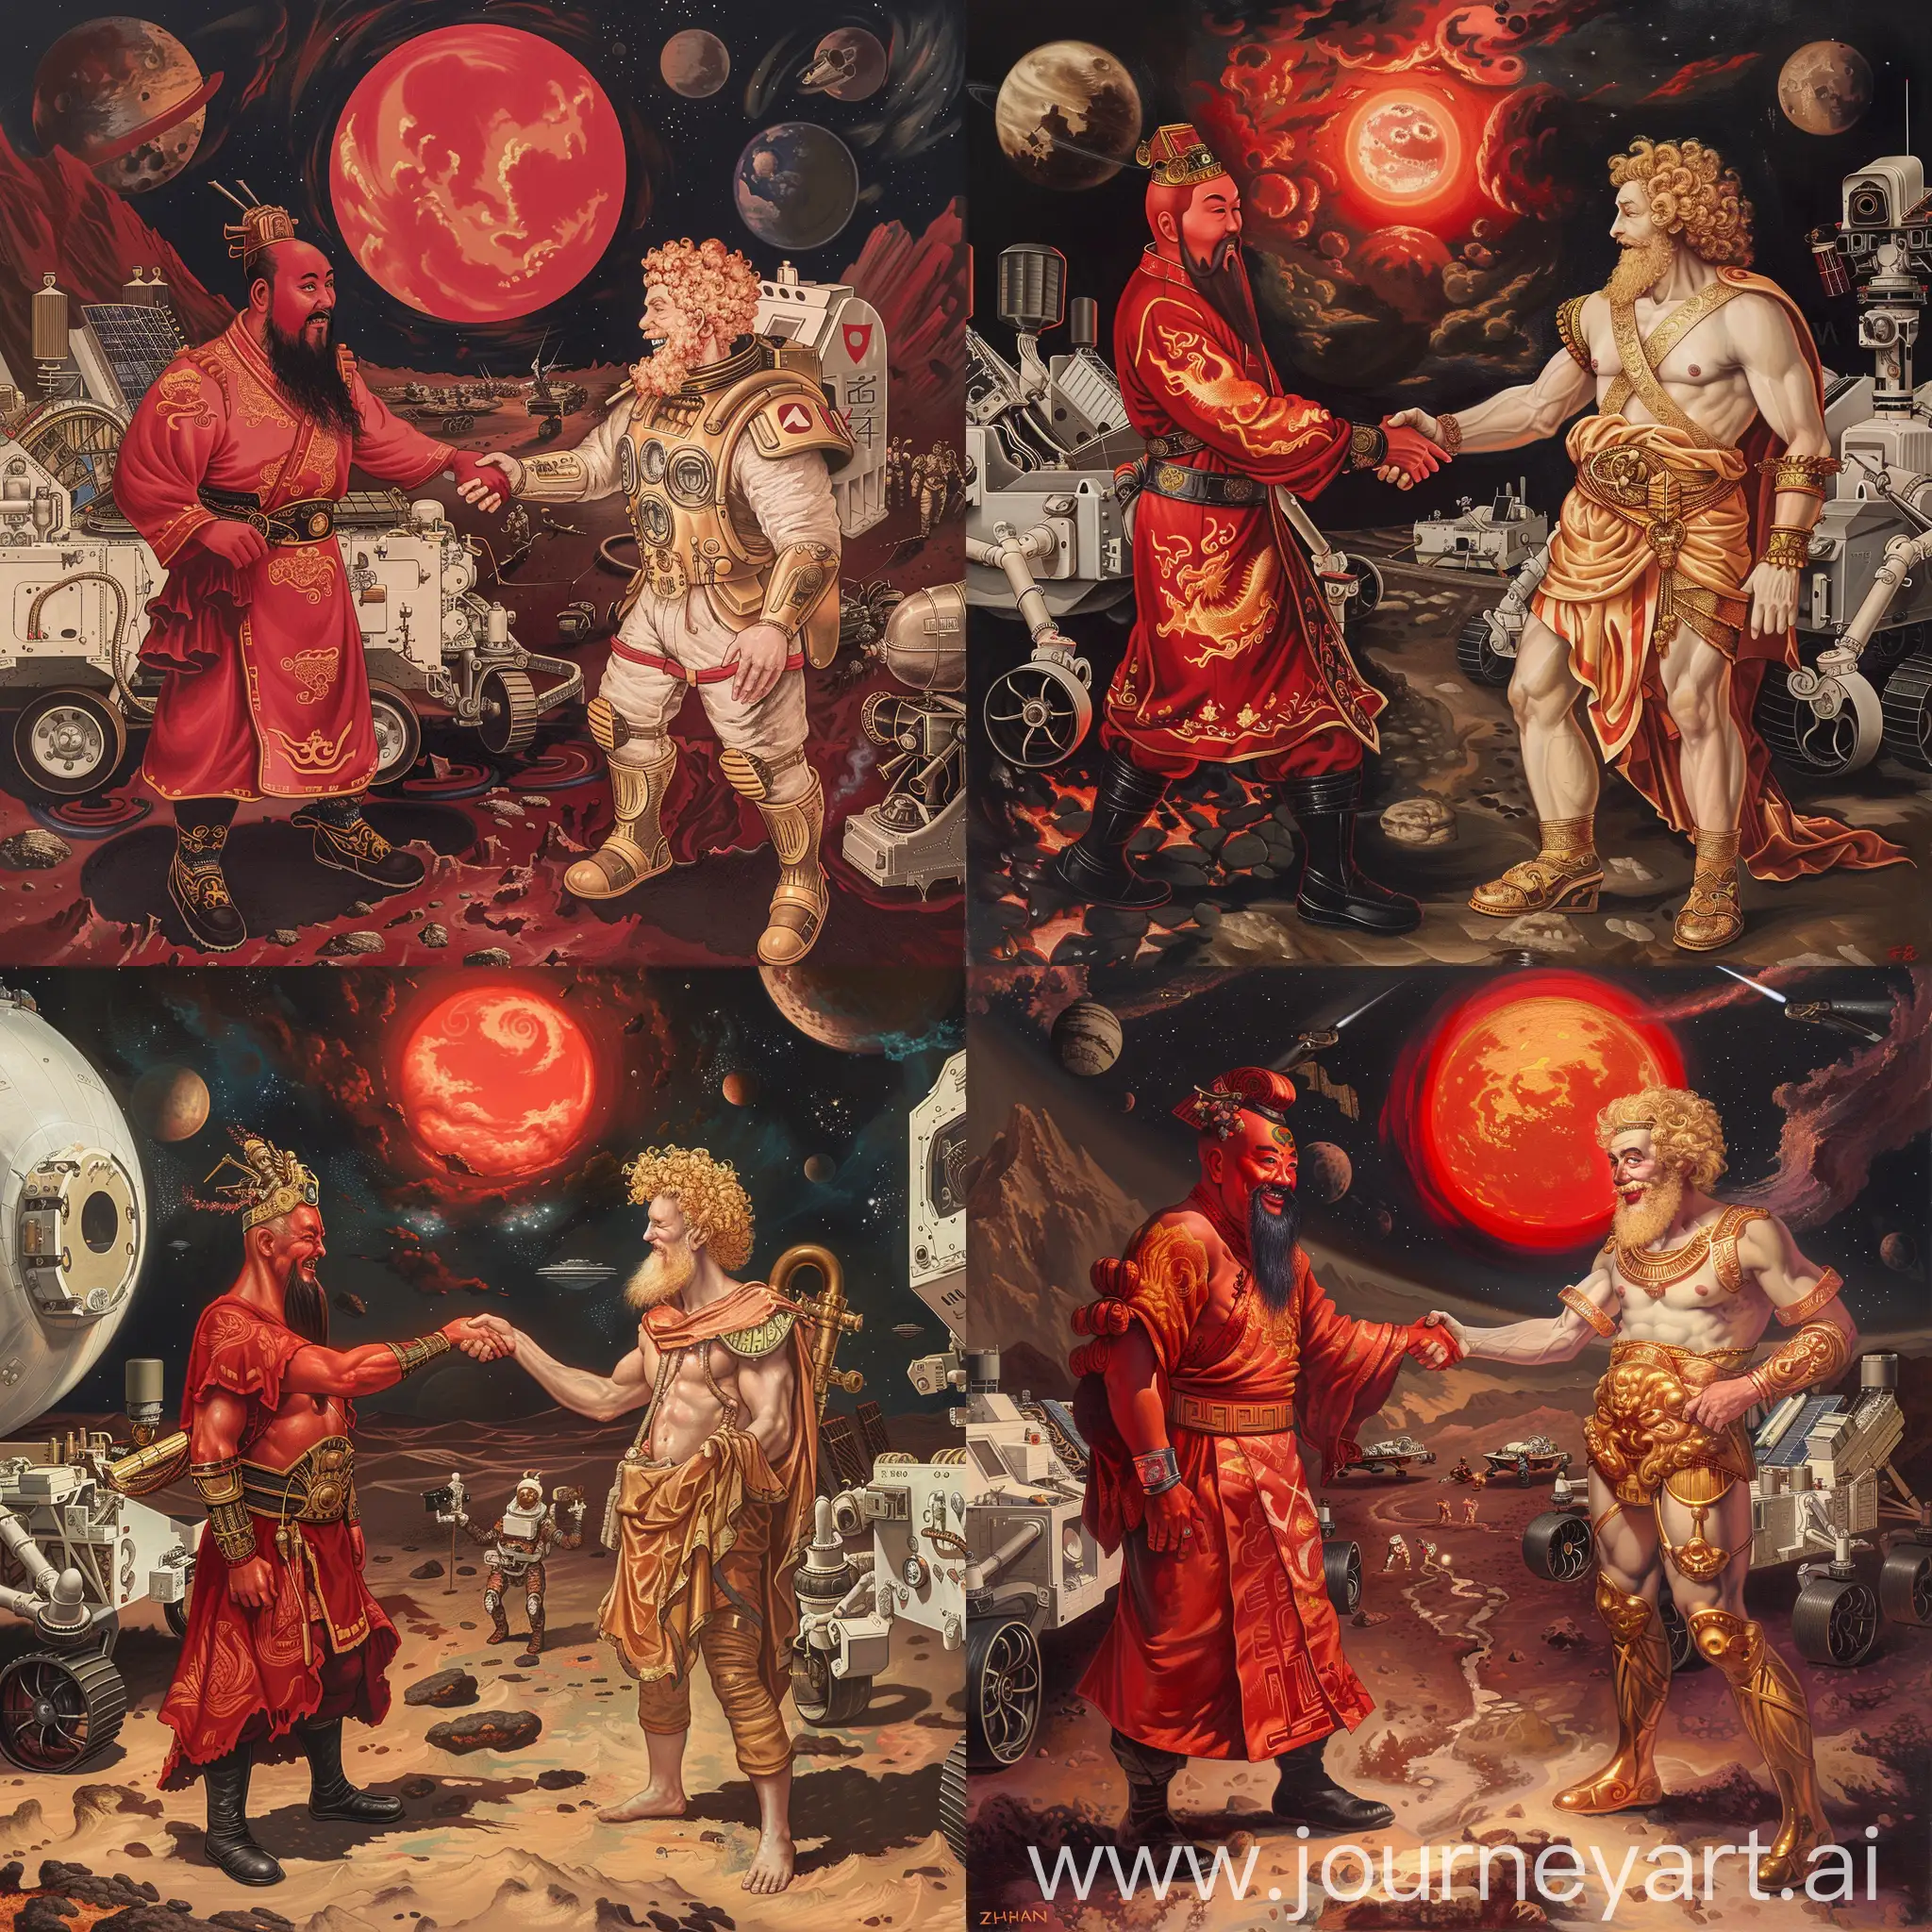 Mucha painting mode:

at left, a Chinese Mars rover Zhurong, and an ancient handsome Chinese fire god in red Hanfu robe and black boots, with red skin and black beard.

at right, a USA Mars rover Perseverance, and a Greek god Vulcan with blond curly hair, beard and golden Greek clothes.

they are friendly and shaking hand wih each other.
they are 

Mars steel bases and other white Spaceships as background,

a red sun is smiling in dark sky,